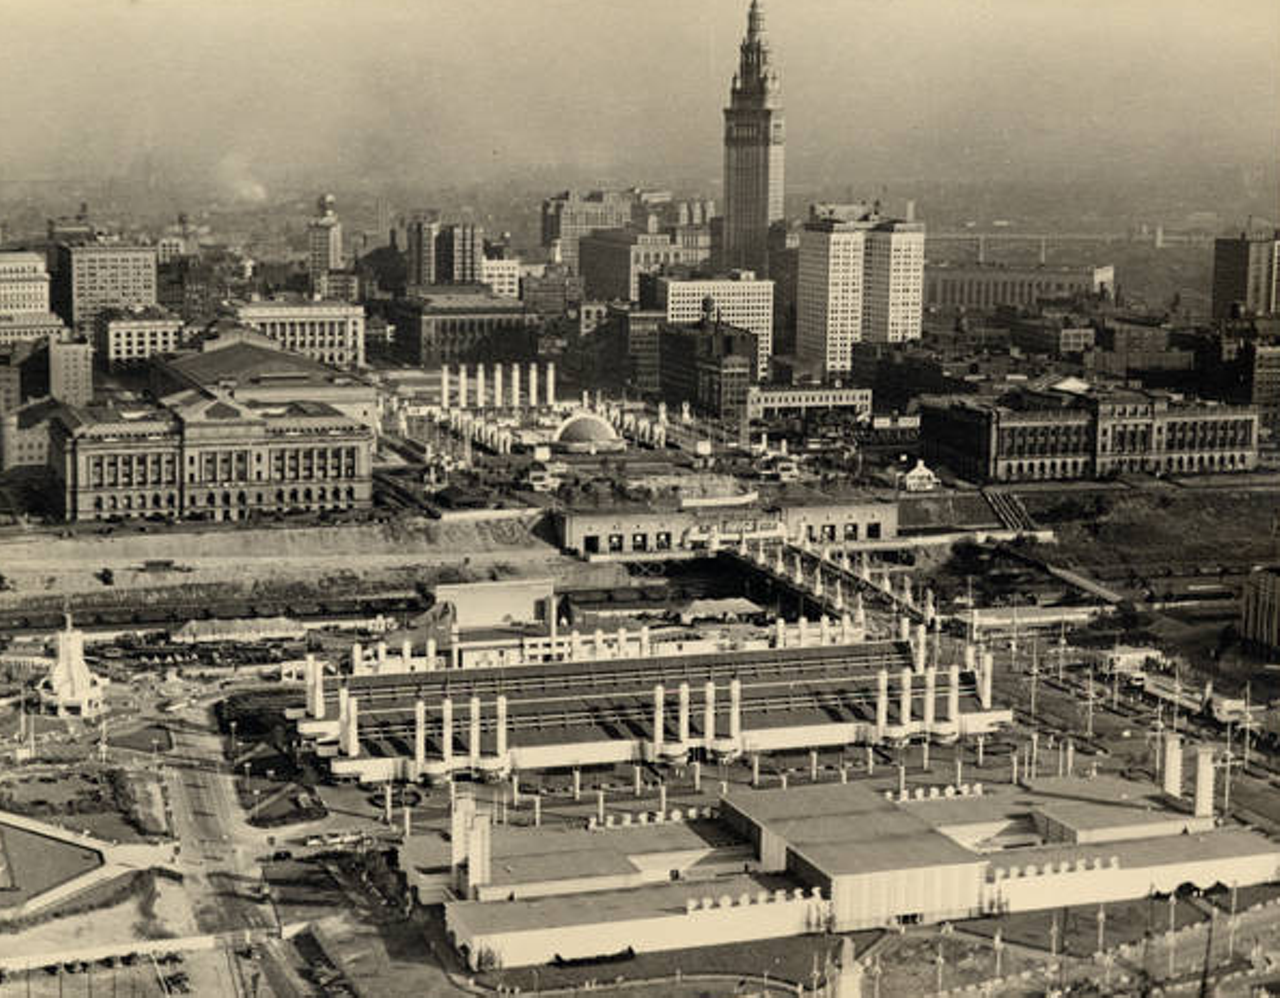 Aerial view of the Great Lakes Exposition and of downtown Cleveland, 1936-1937.